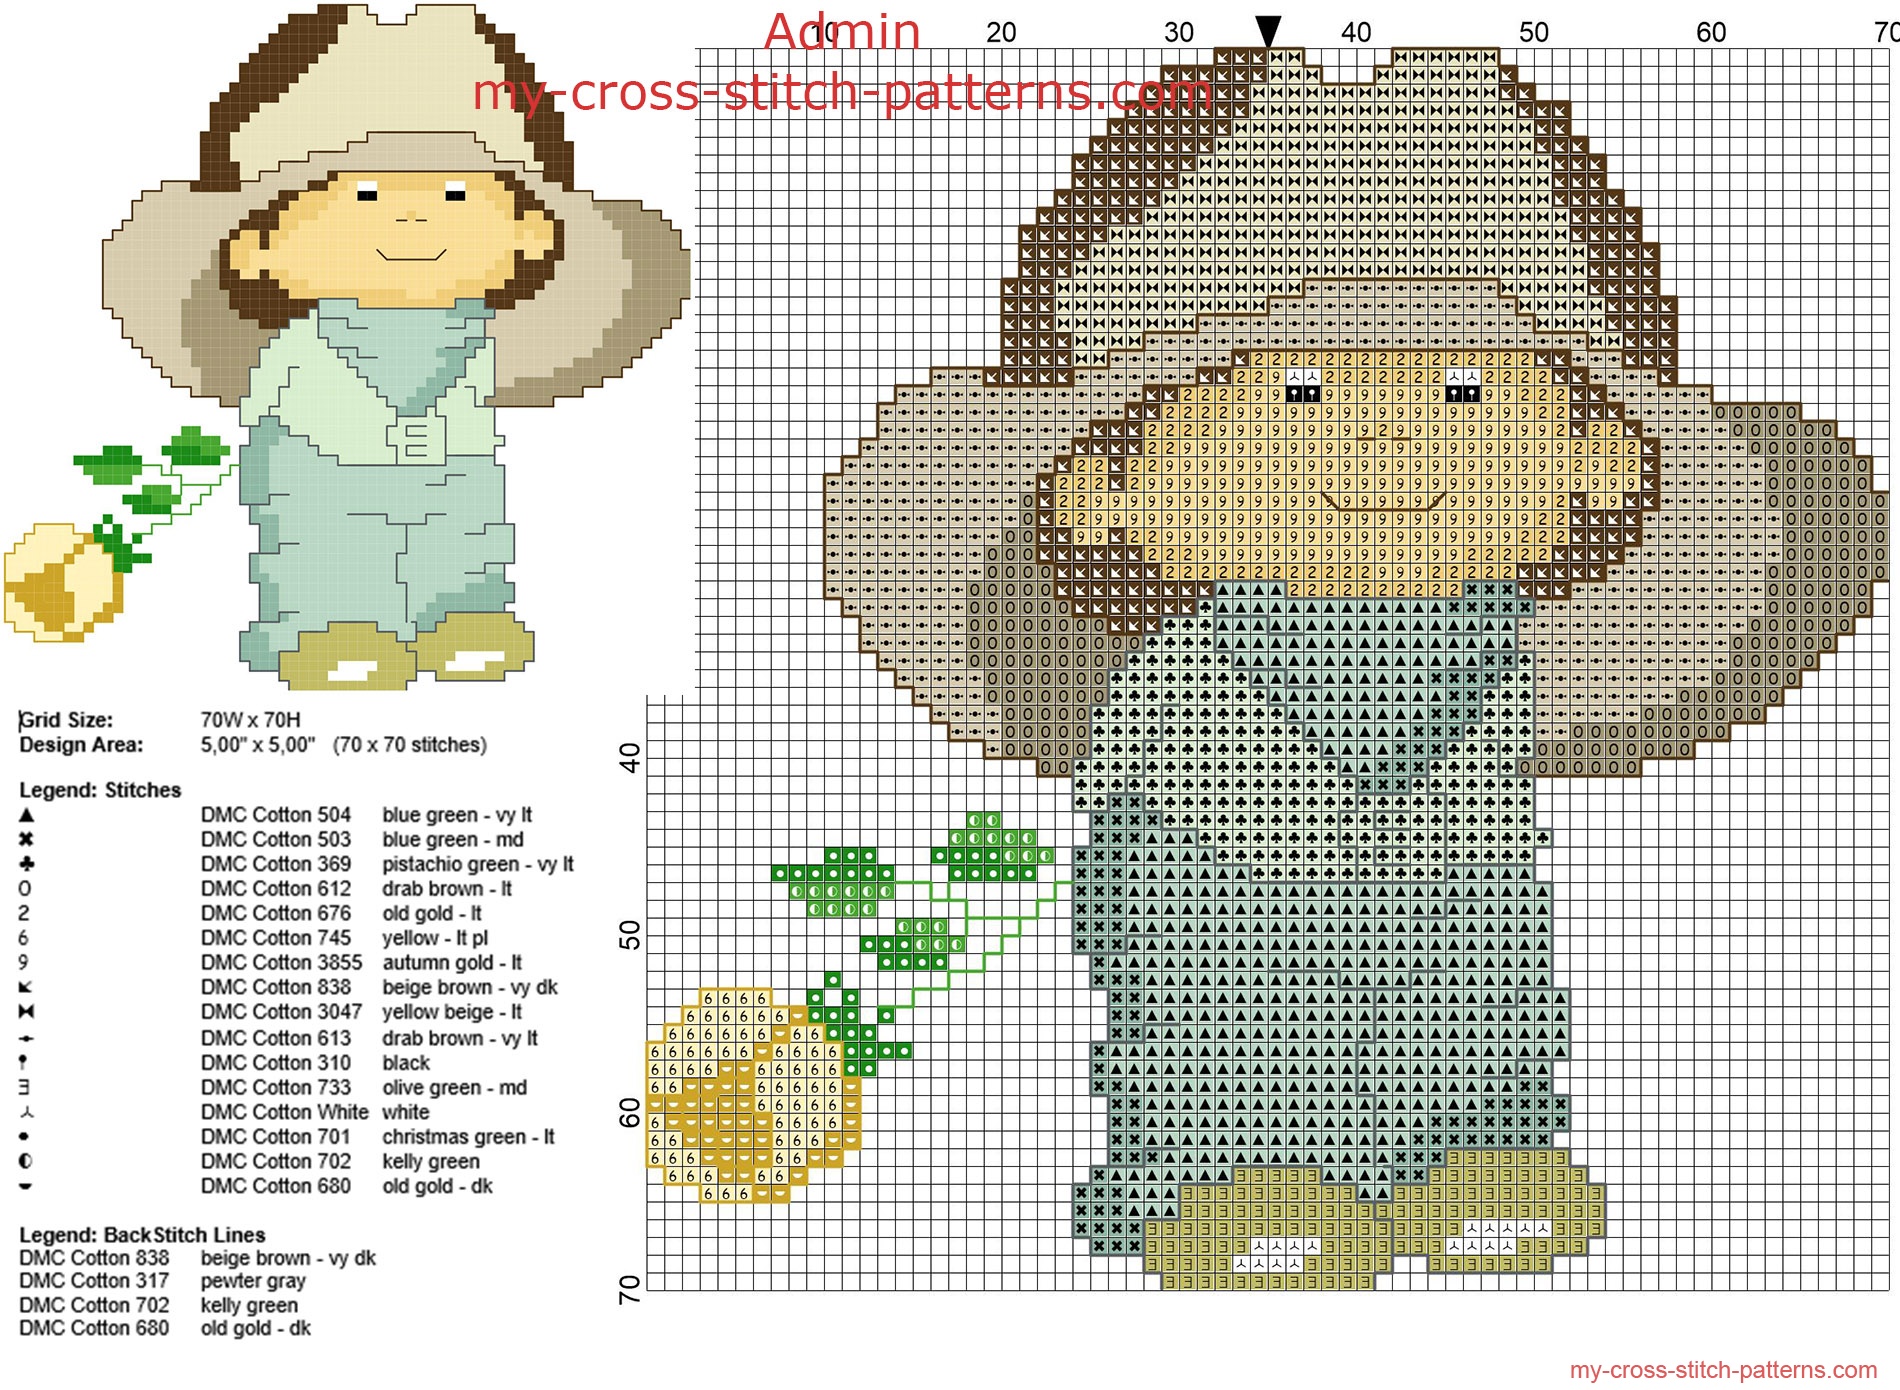 neghinita_romanian_baby_fable_character_small_size_with_backstitch_use_70_x_70_stitches